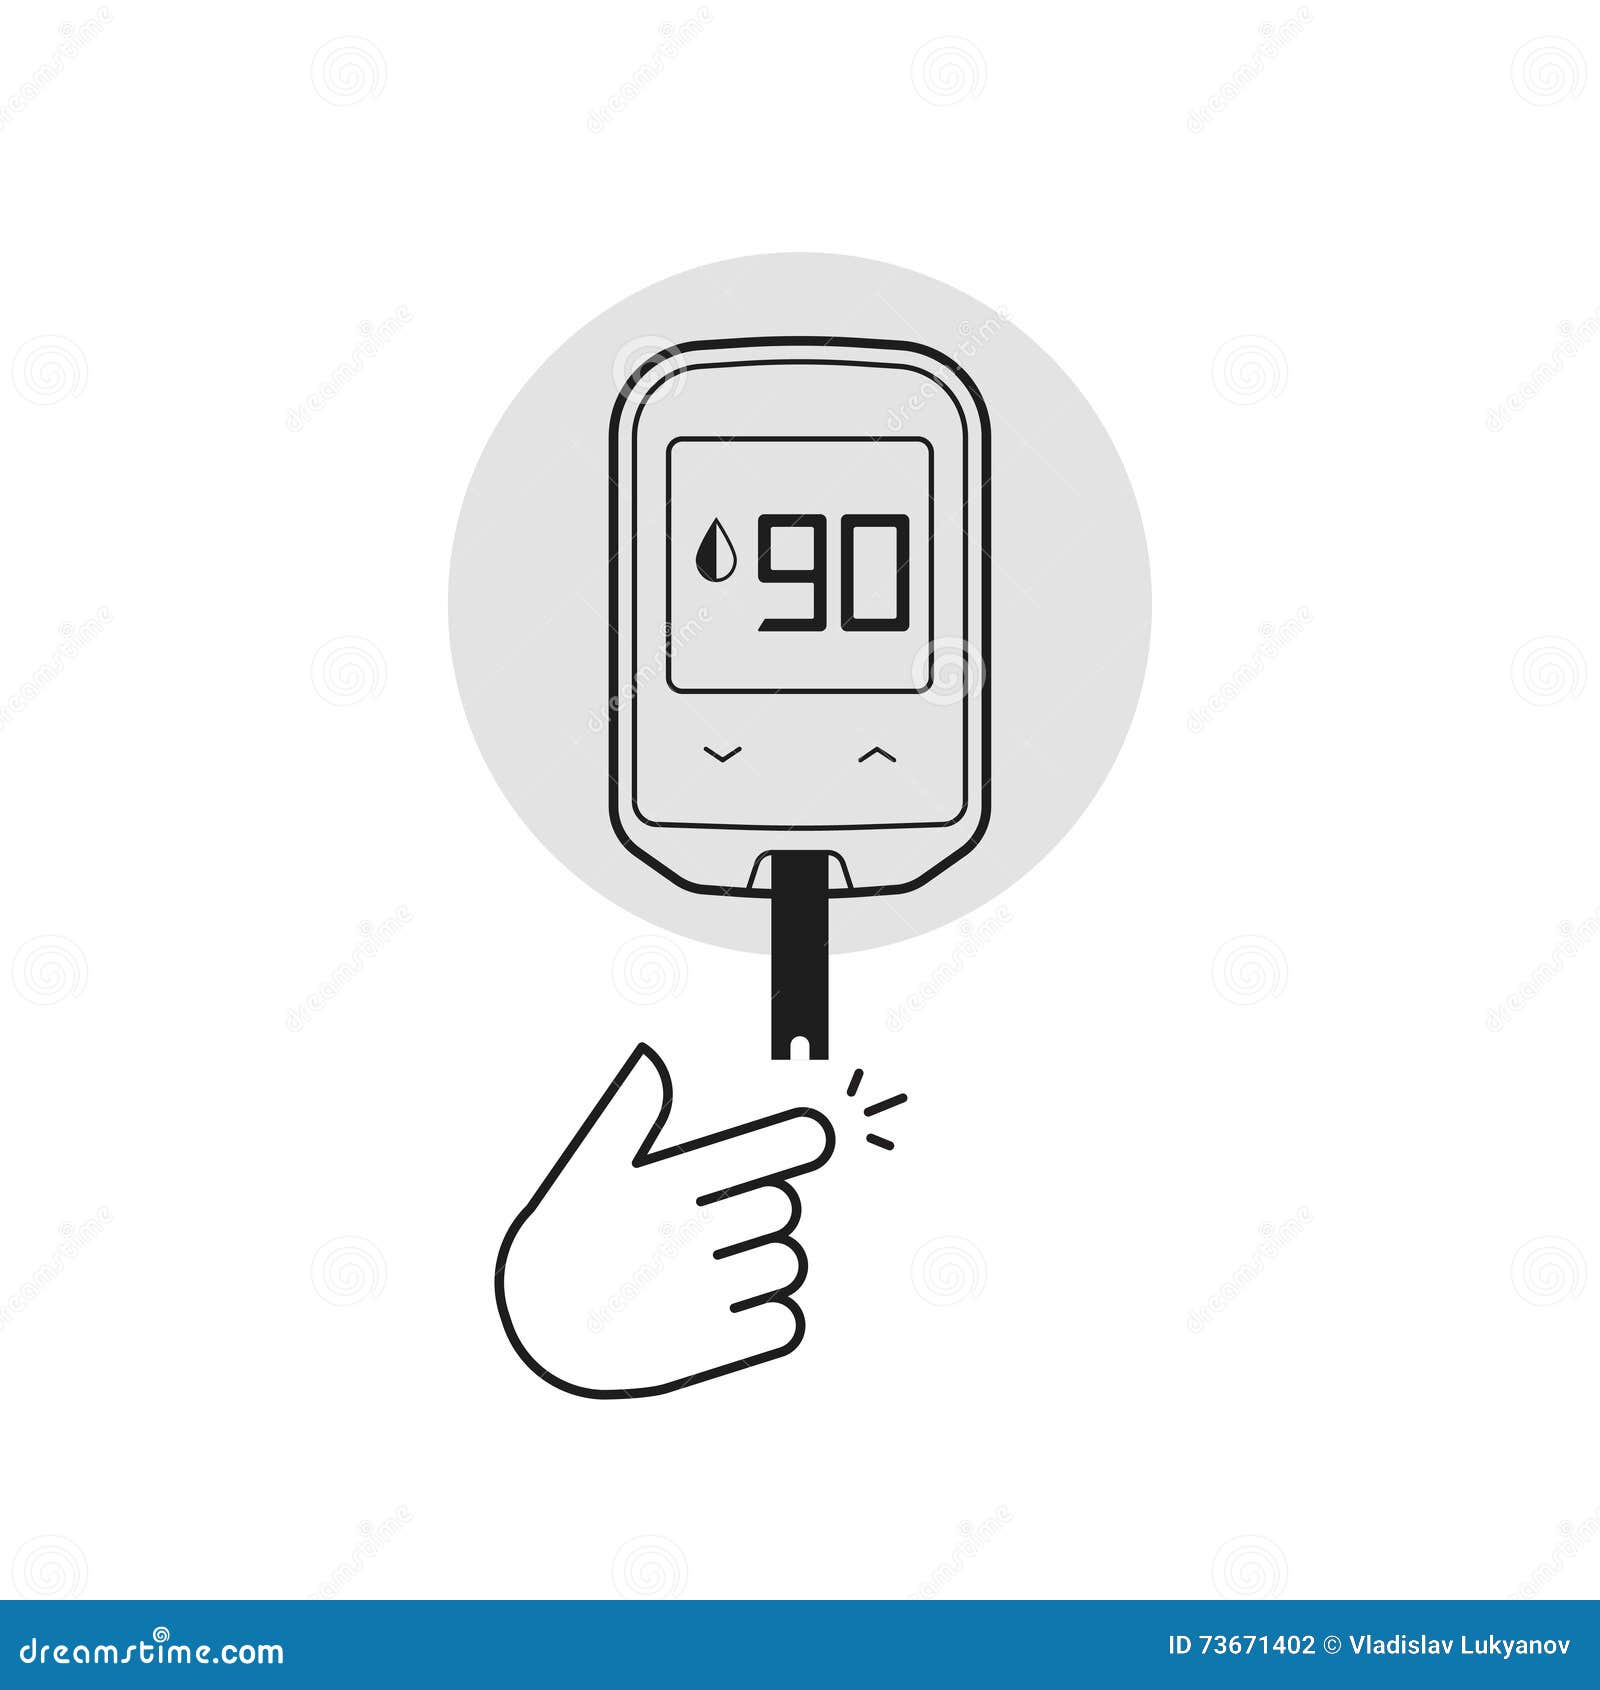 clipart blood glucose monitor - photo #6